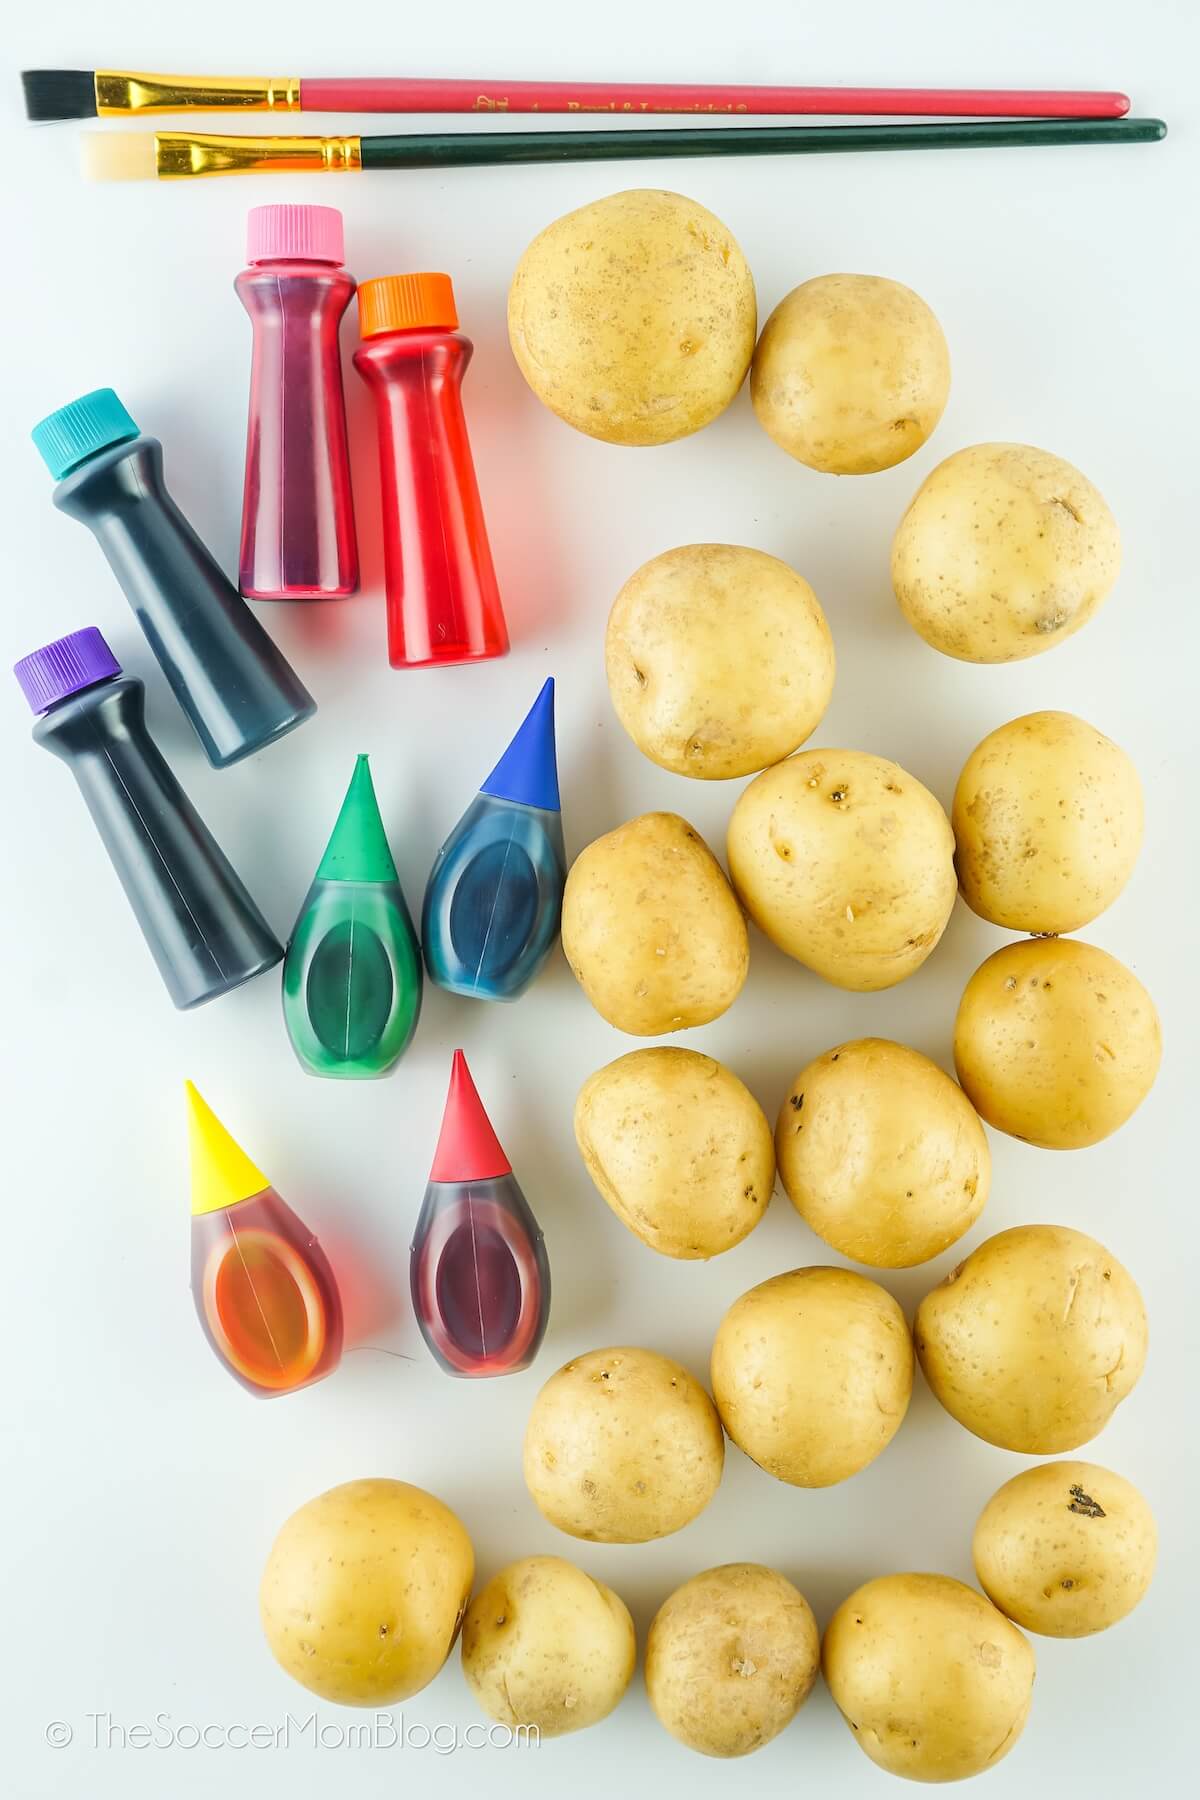 Yukon gold potatoes, food coloring, and paint brushes